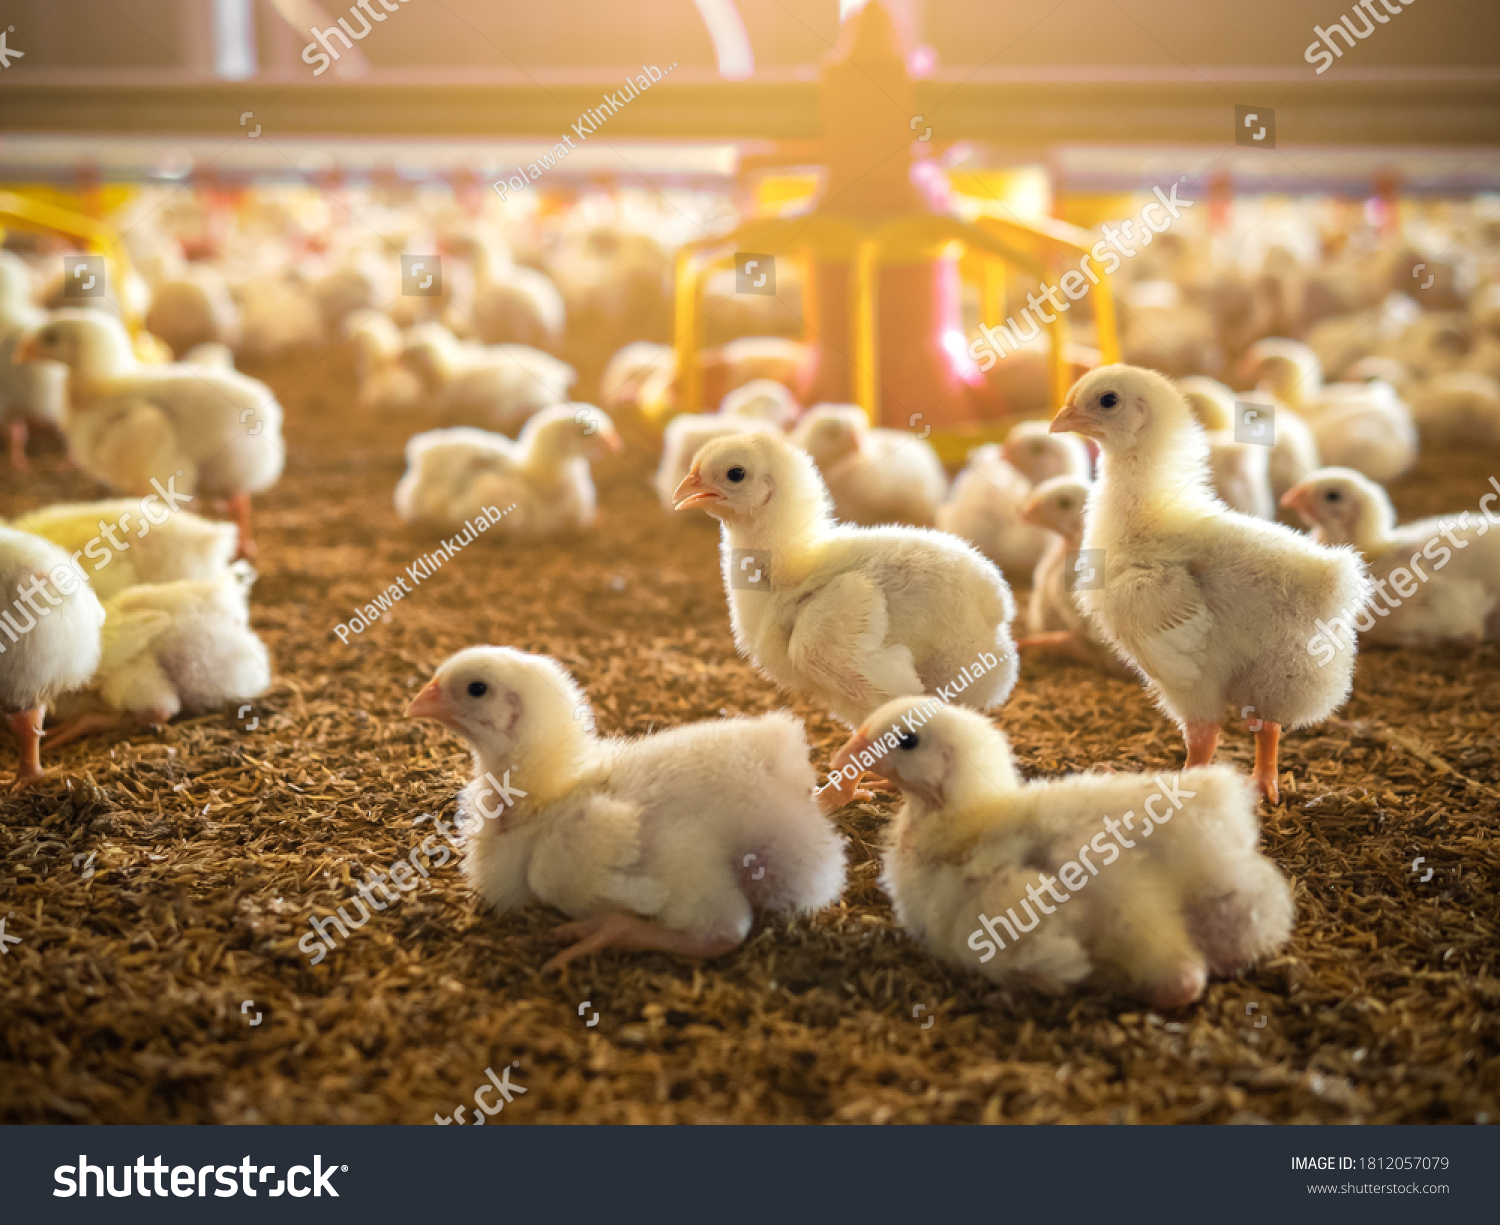 The little chickens in the smart farming. The animals farming business with feeding automation supply picture with yellow light #1812057079